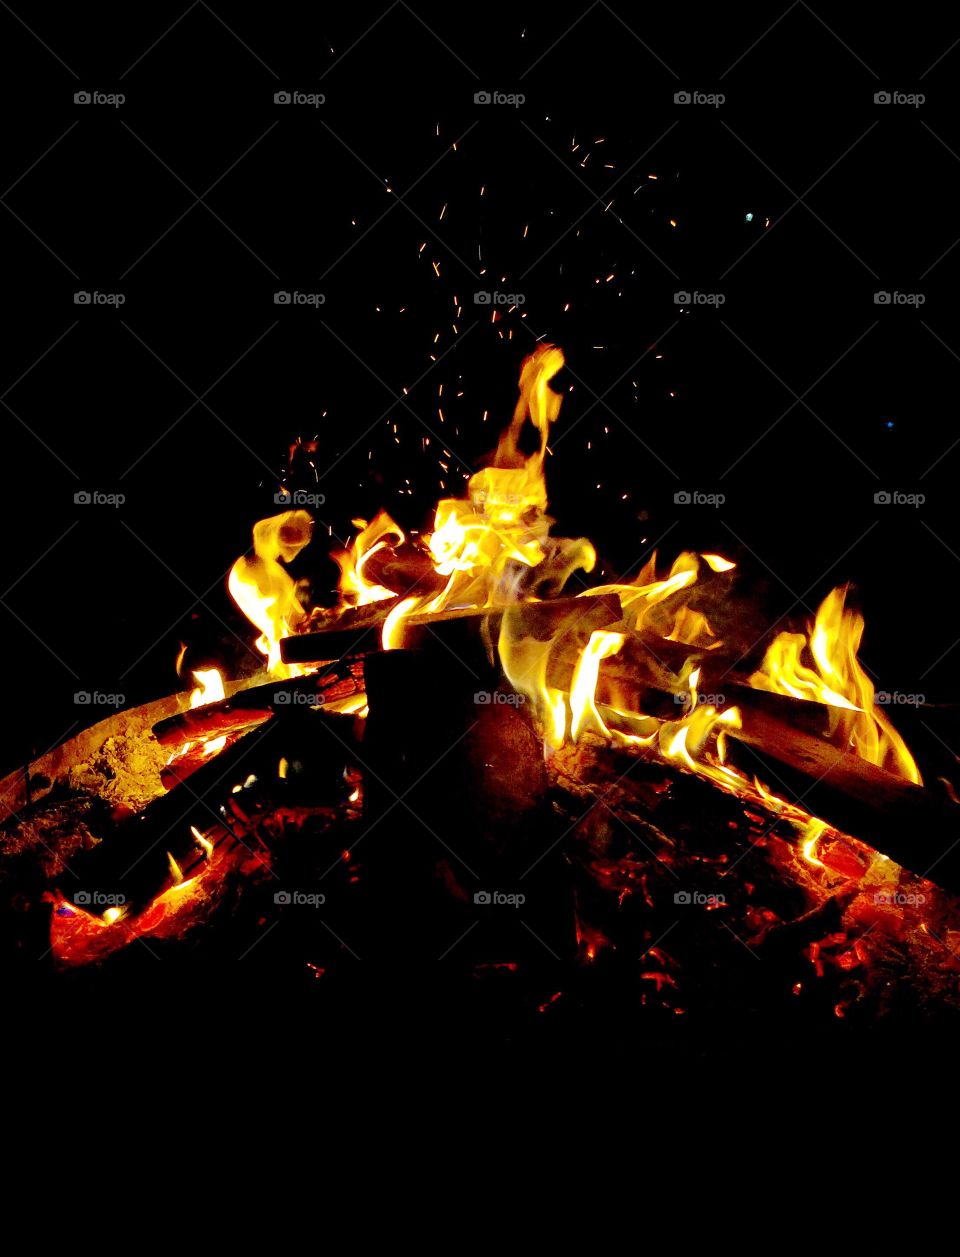 A warn crackling fire at night